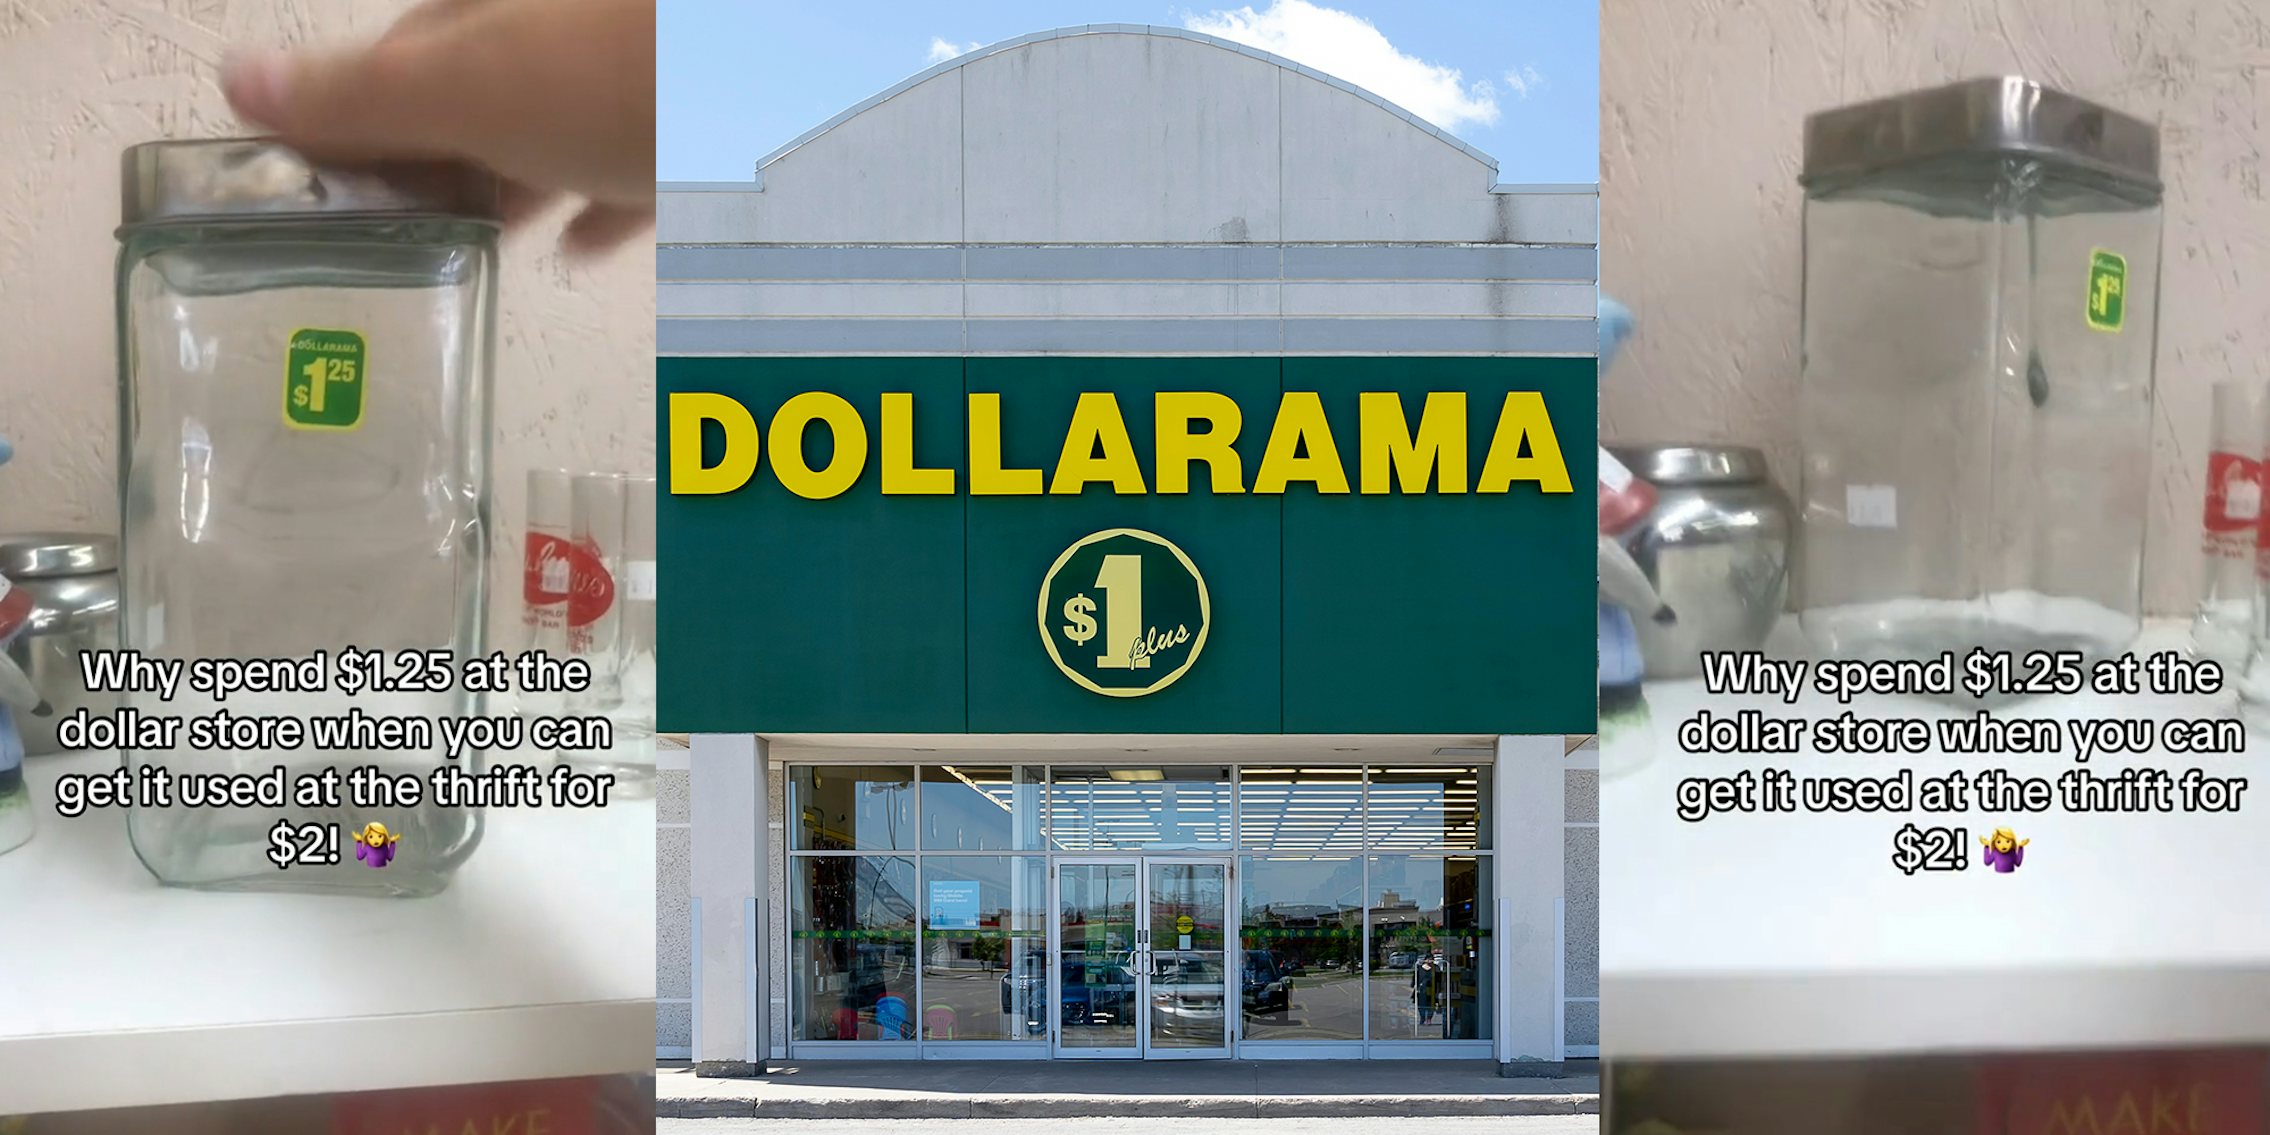 customer finds jar from dollarama for sale at thrift store. it's 75 cents more expensive